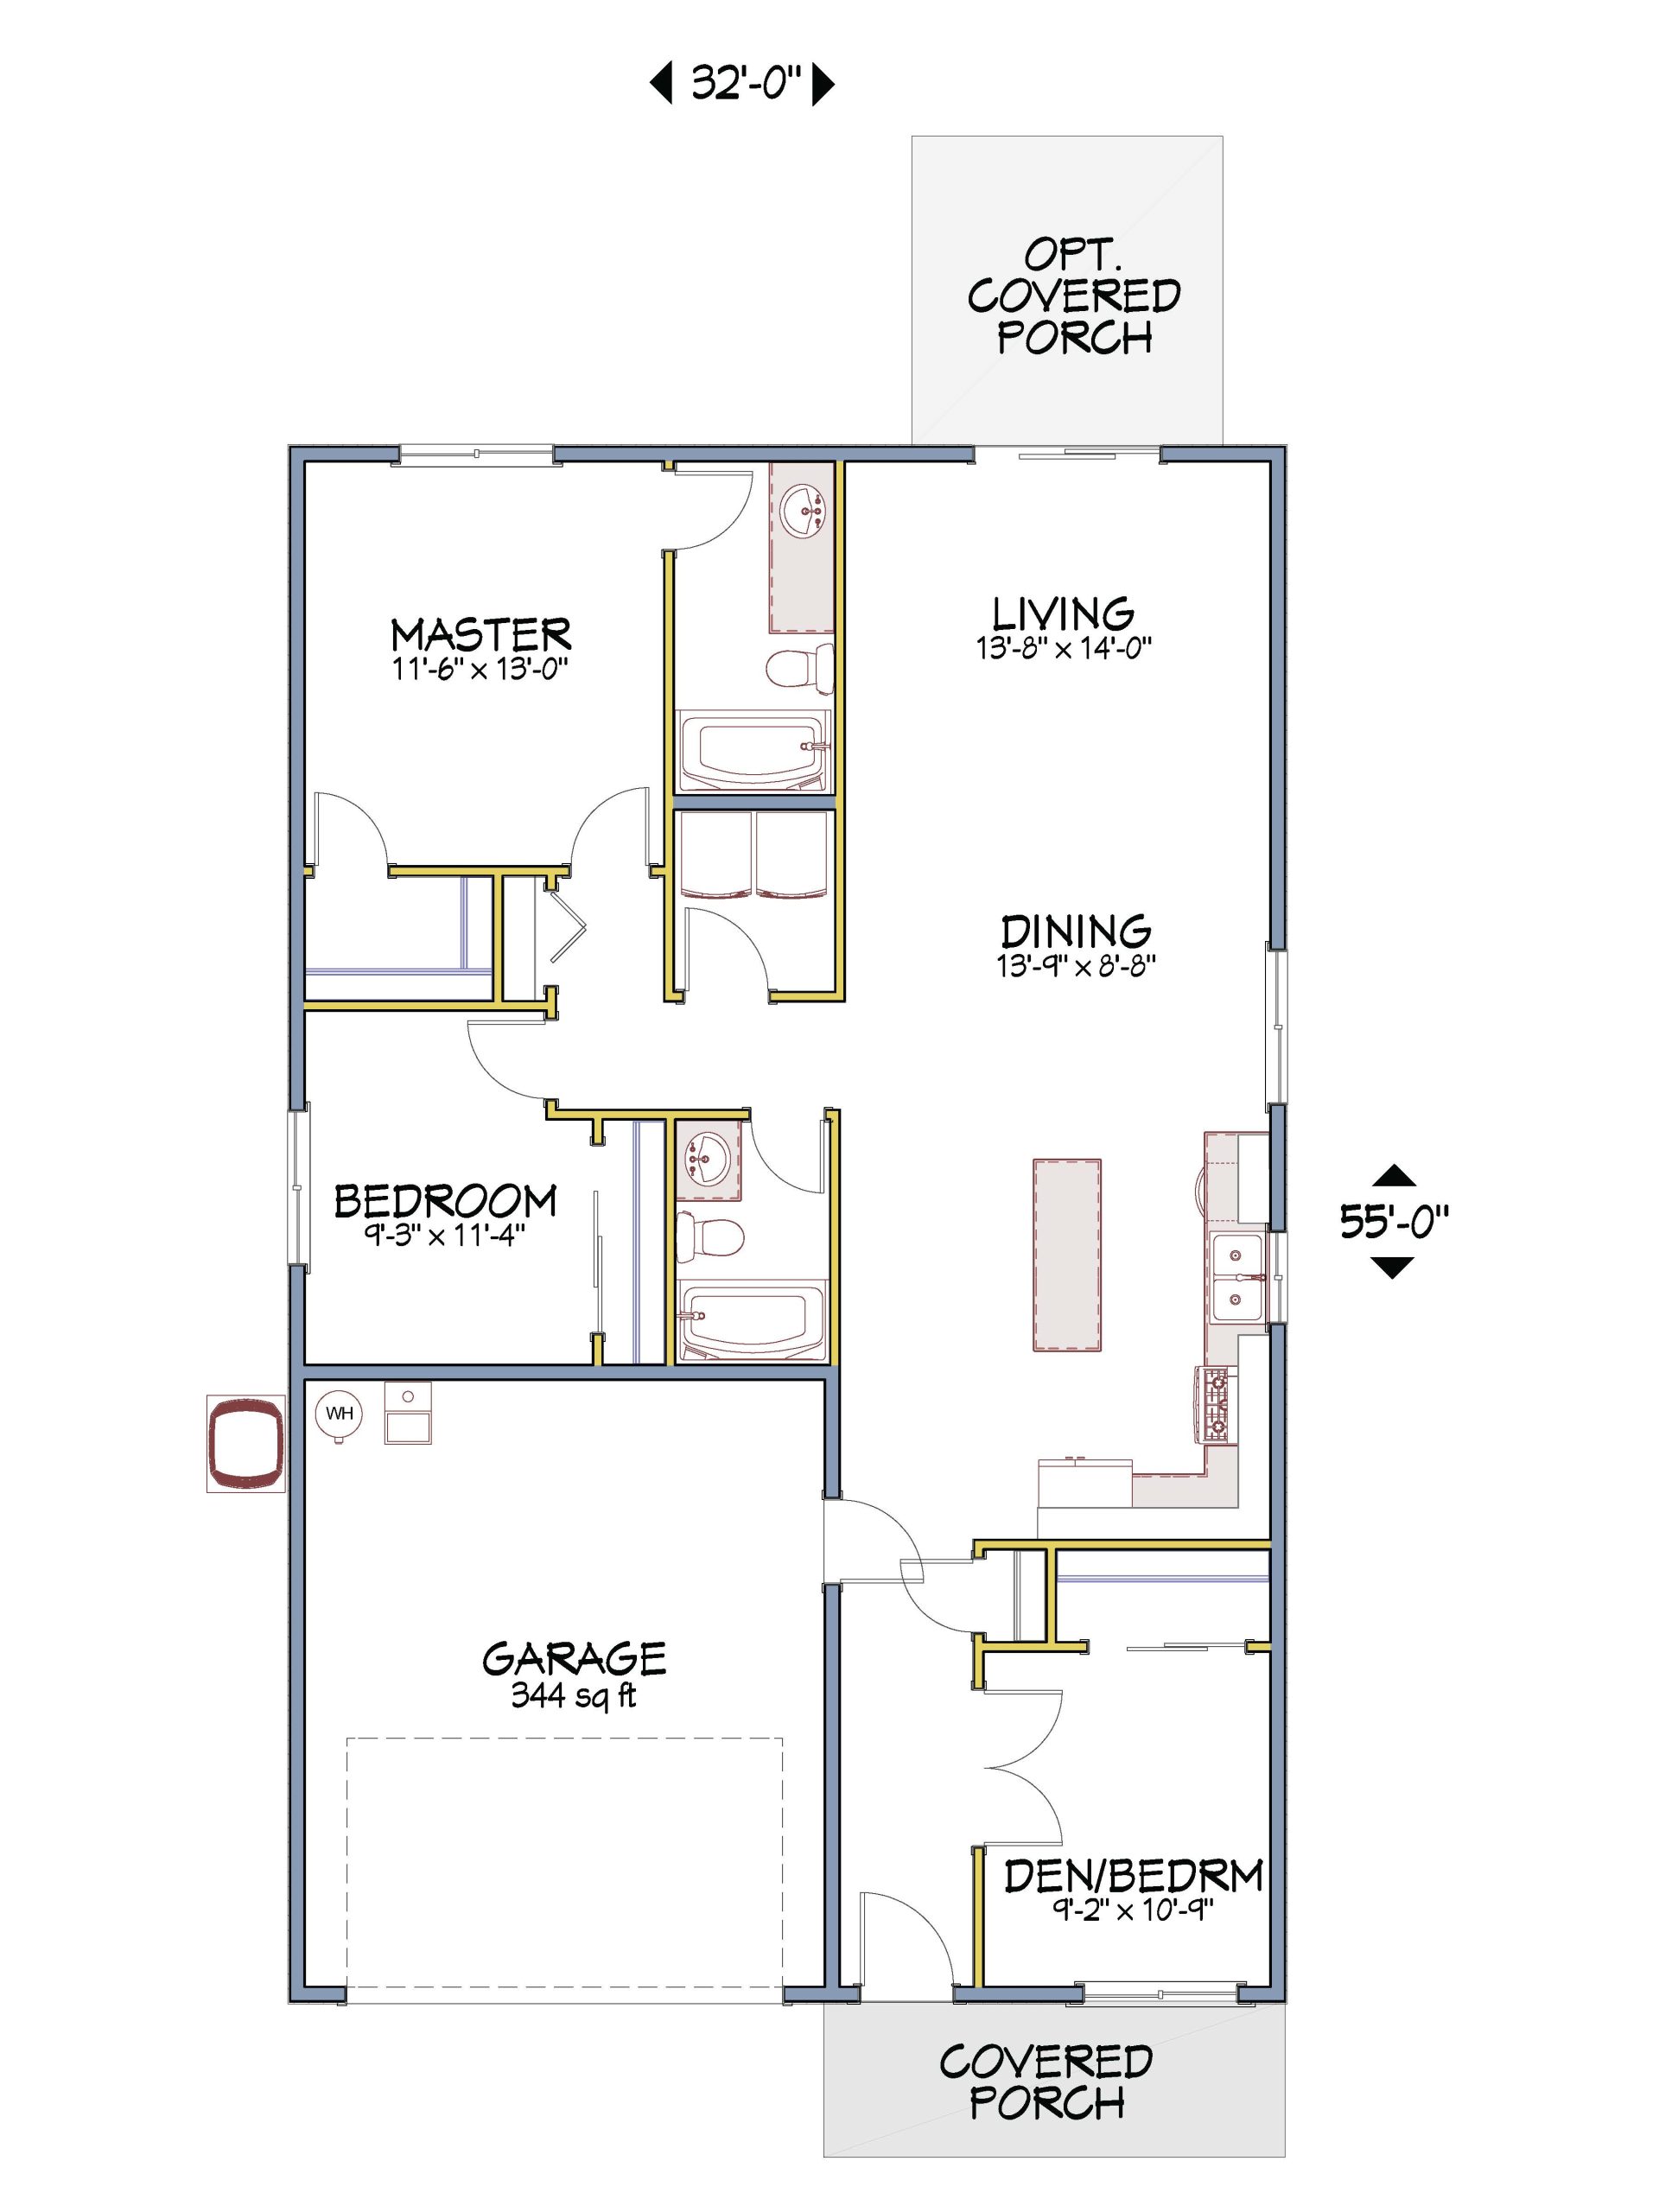 Floor plan of a one level custom home by Design NW